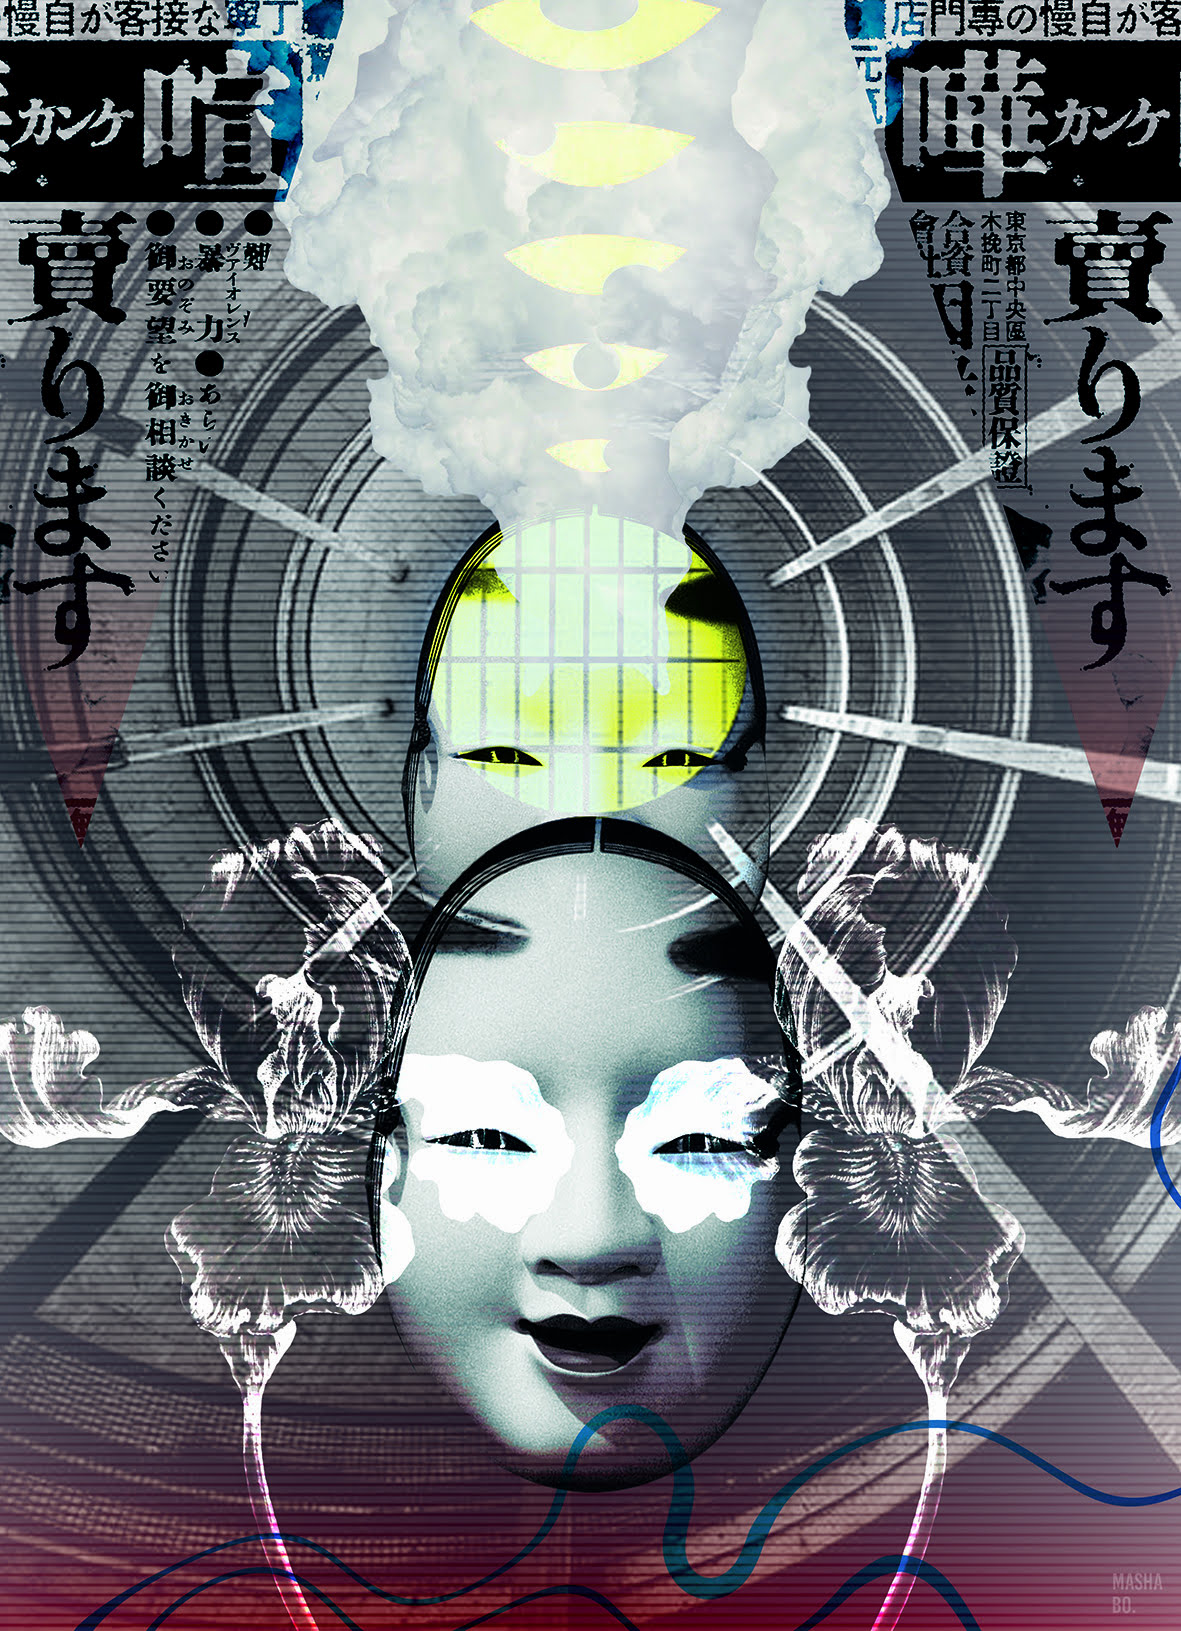 Print for sale from contemporary artist. Asian eyes cut look through steam going from round grid. For sale.